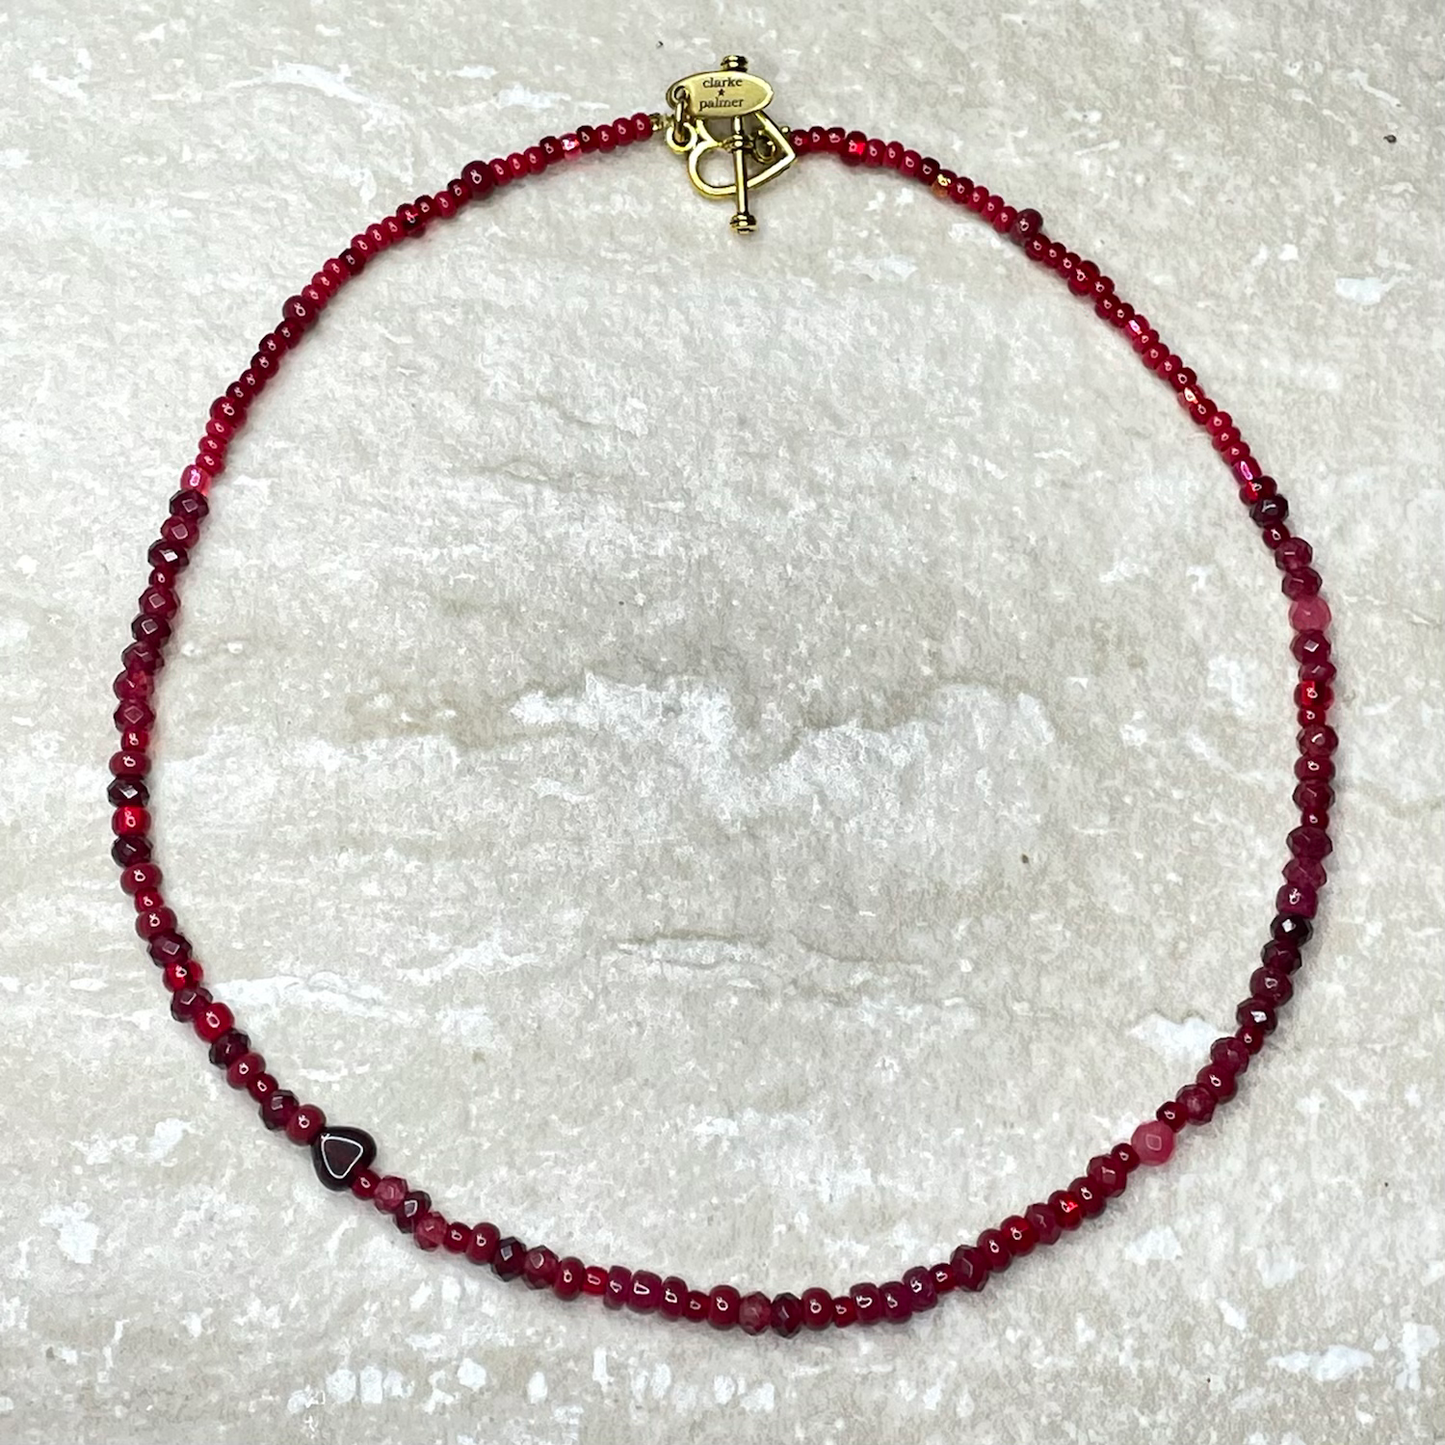 There's No Place Like Home Ruby and Garnet Necklace